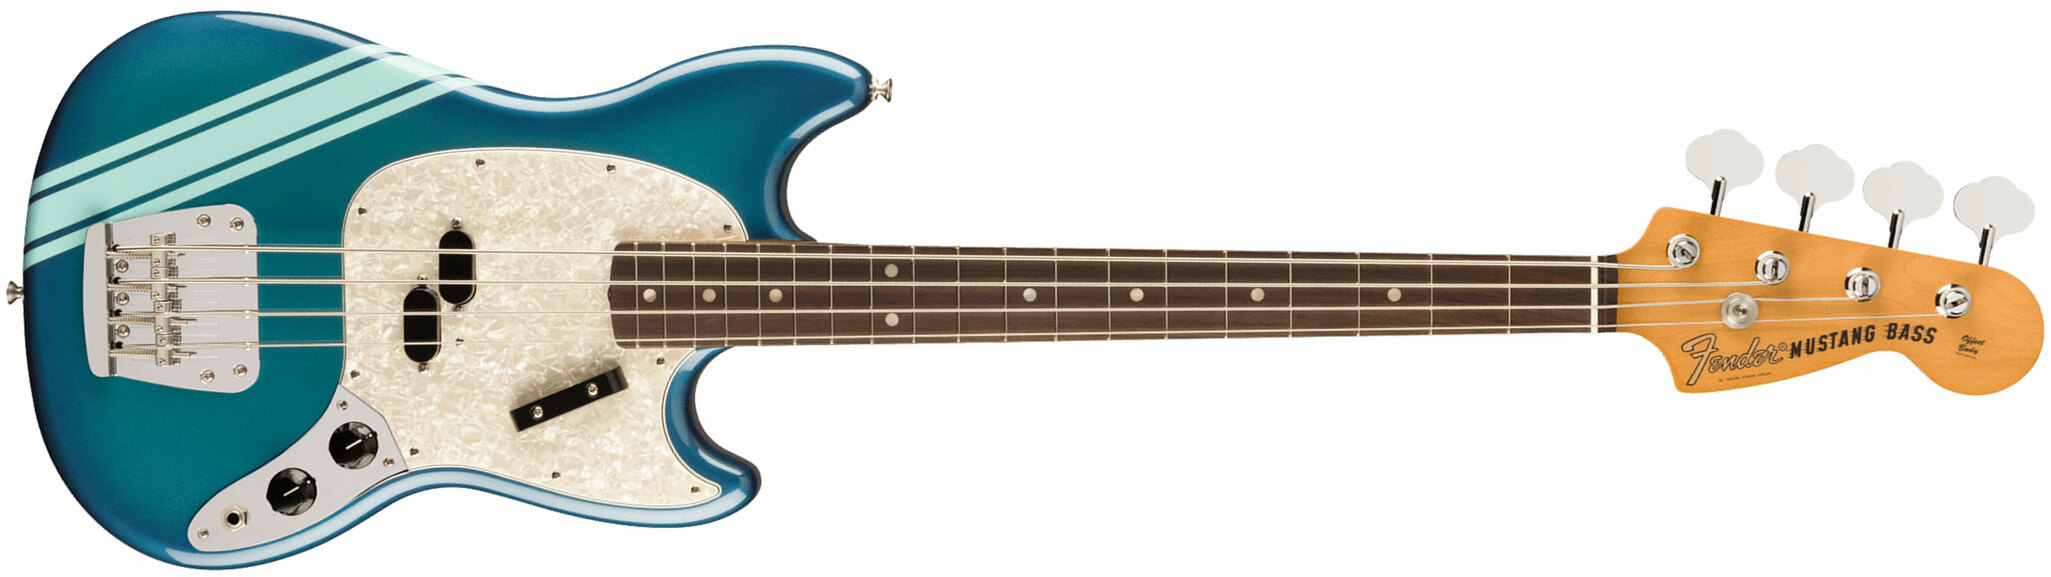 Fender Mustang Bass 70s Competition Vintera 2 Rw - Competition Blue - Basse Électrique Solid Body - Main picture